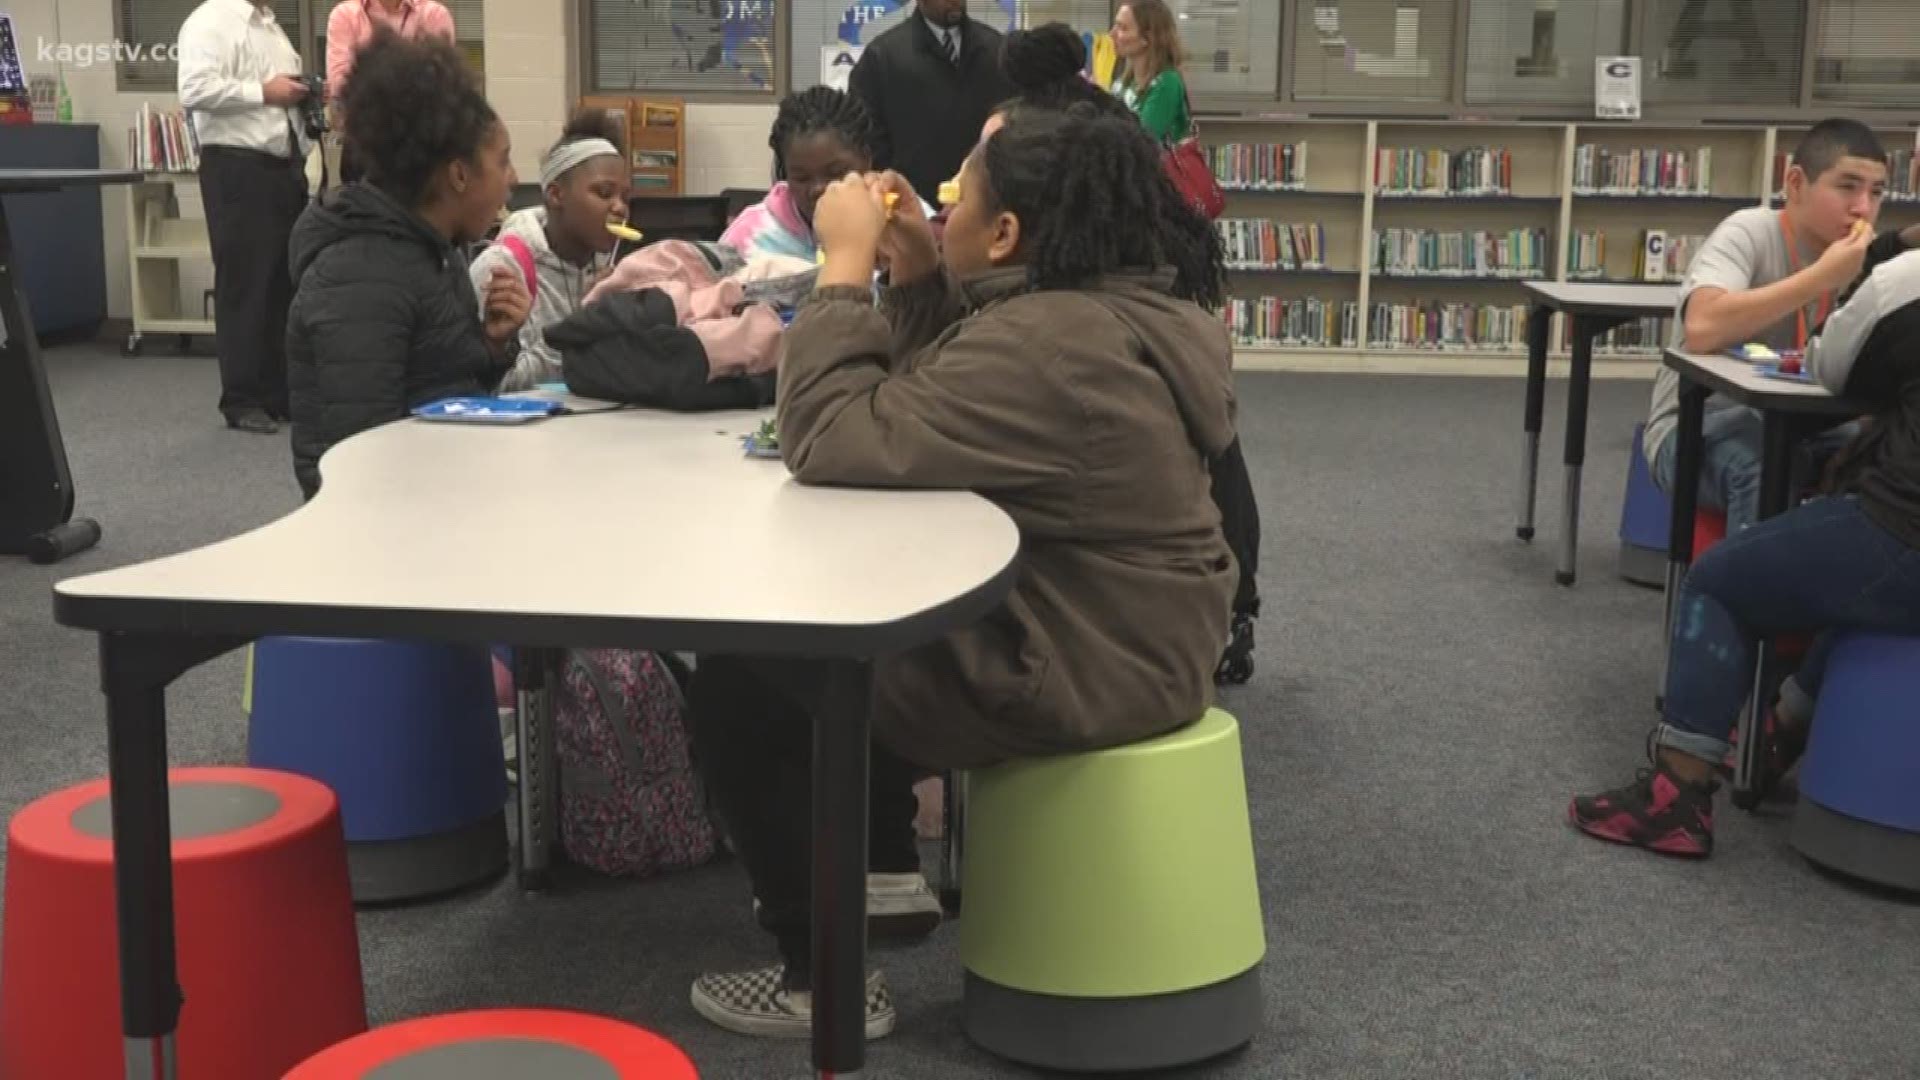 The GiveJoy Foundation worked with Bryan ISD to make two middle school libraries fidget-friendly using flexible seating.